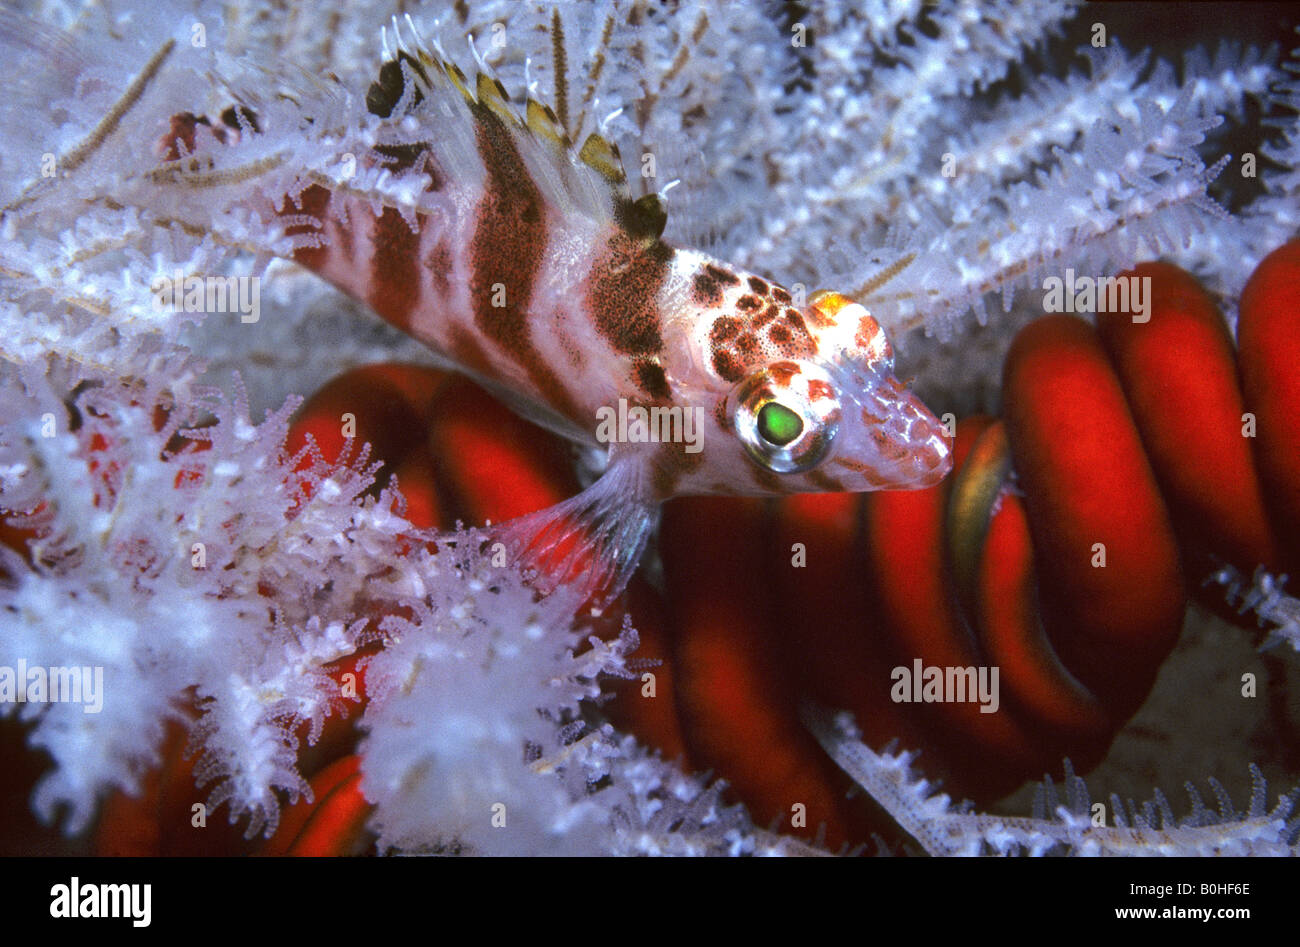 Blotched hawkfish, Cirrhitichthys aprinus, hiding in a black coral tree There is a red snake or serpent star wrapped around the coral tree branch Stock Photo